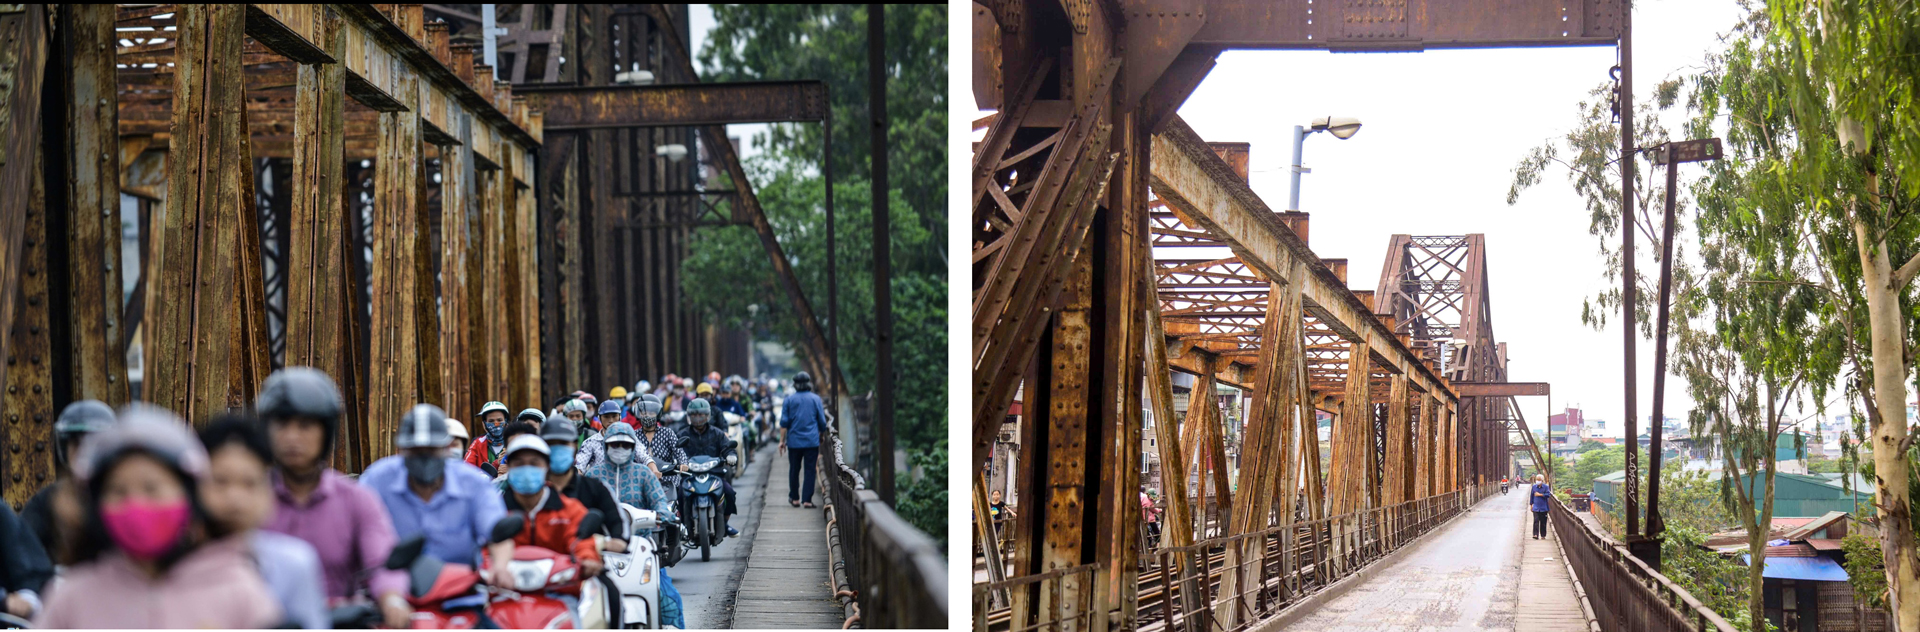 A sharp decrease in the number of commuters on Long Bien Bridge in Hanoi, Vietnam is observed before (left) and during (right) the COVID-19 epidemic. Photos: Hoang Dong - Danh Trong / Tuoi Tre